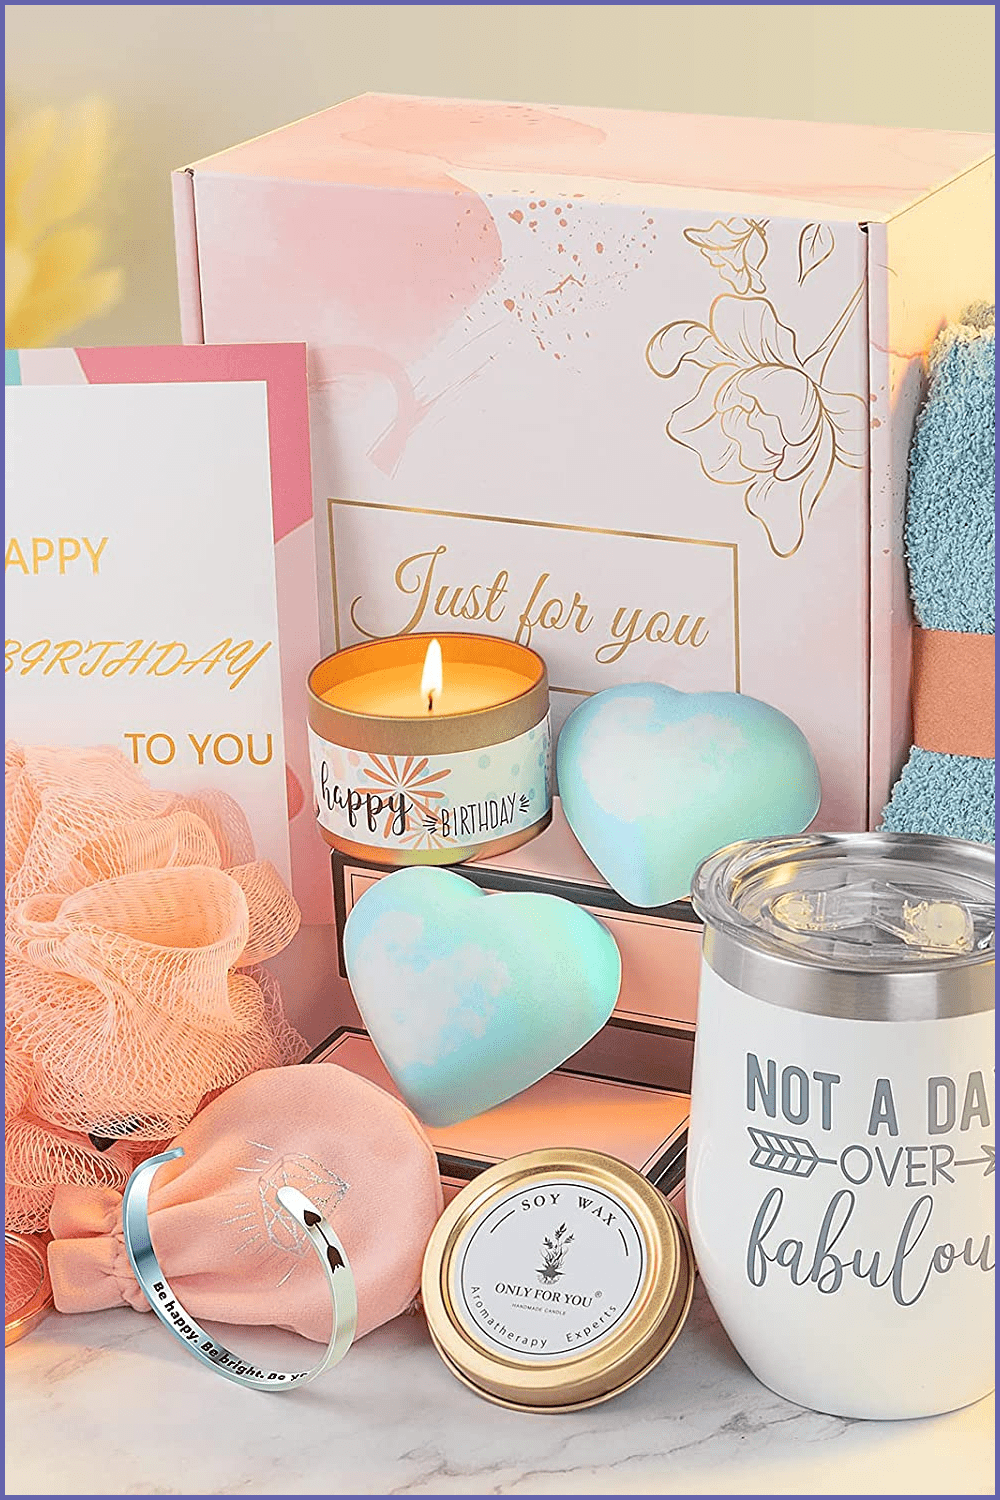 50+ Unique Mother's Day Gifts to Show Your Love – MasterBundles